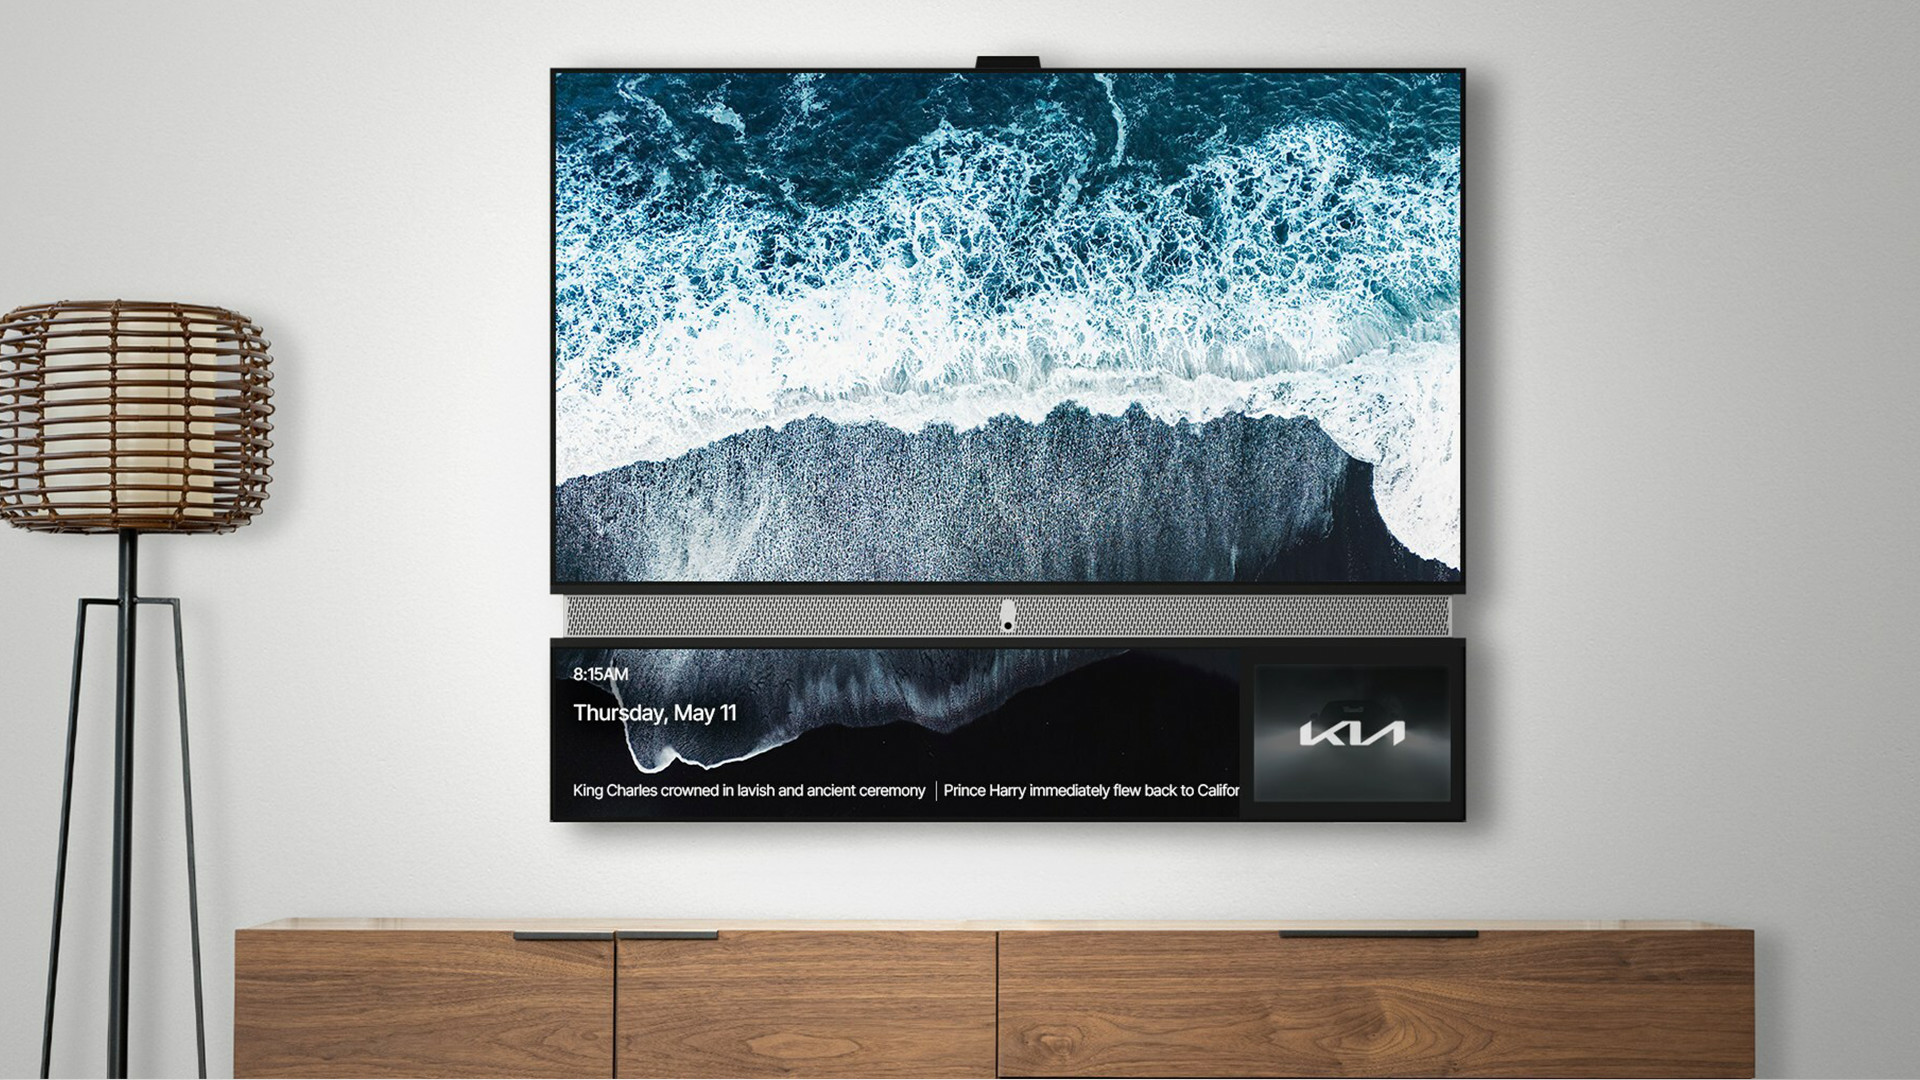 Telly smart TV showing waves